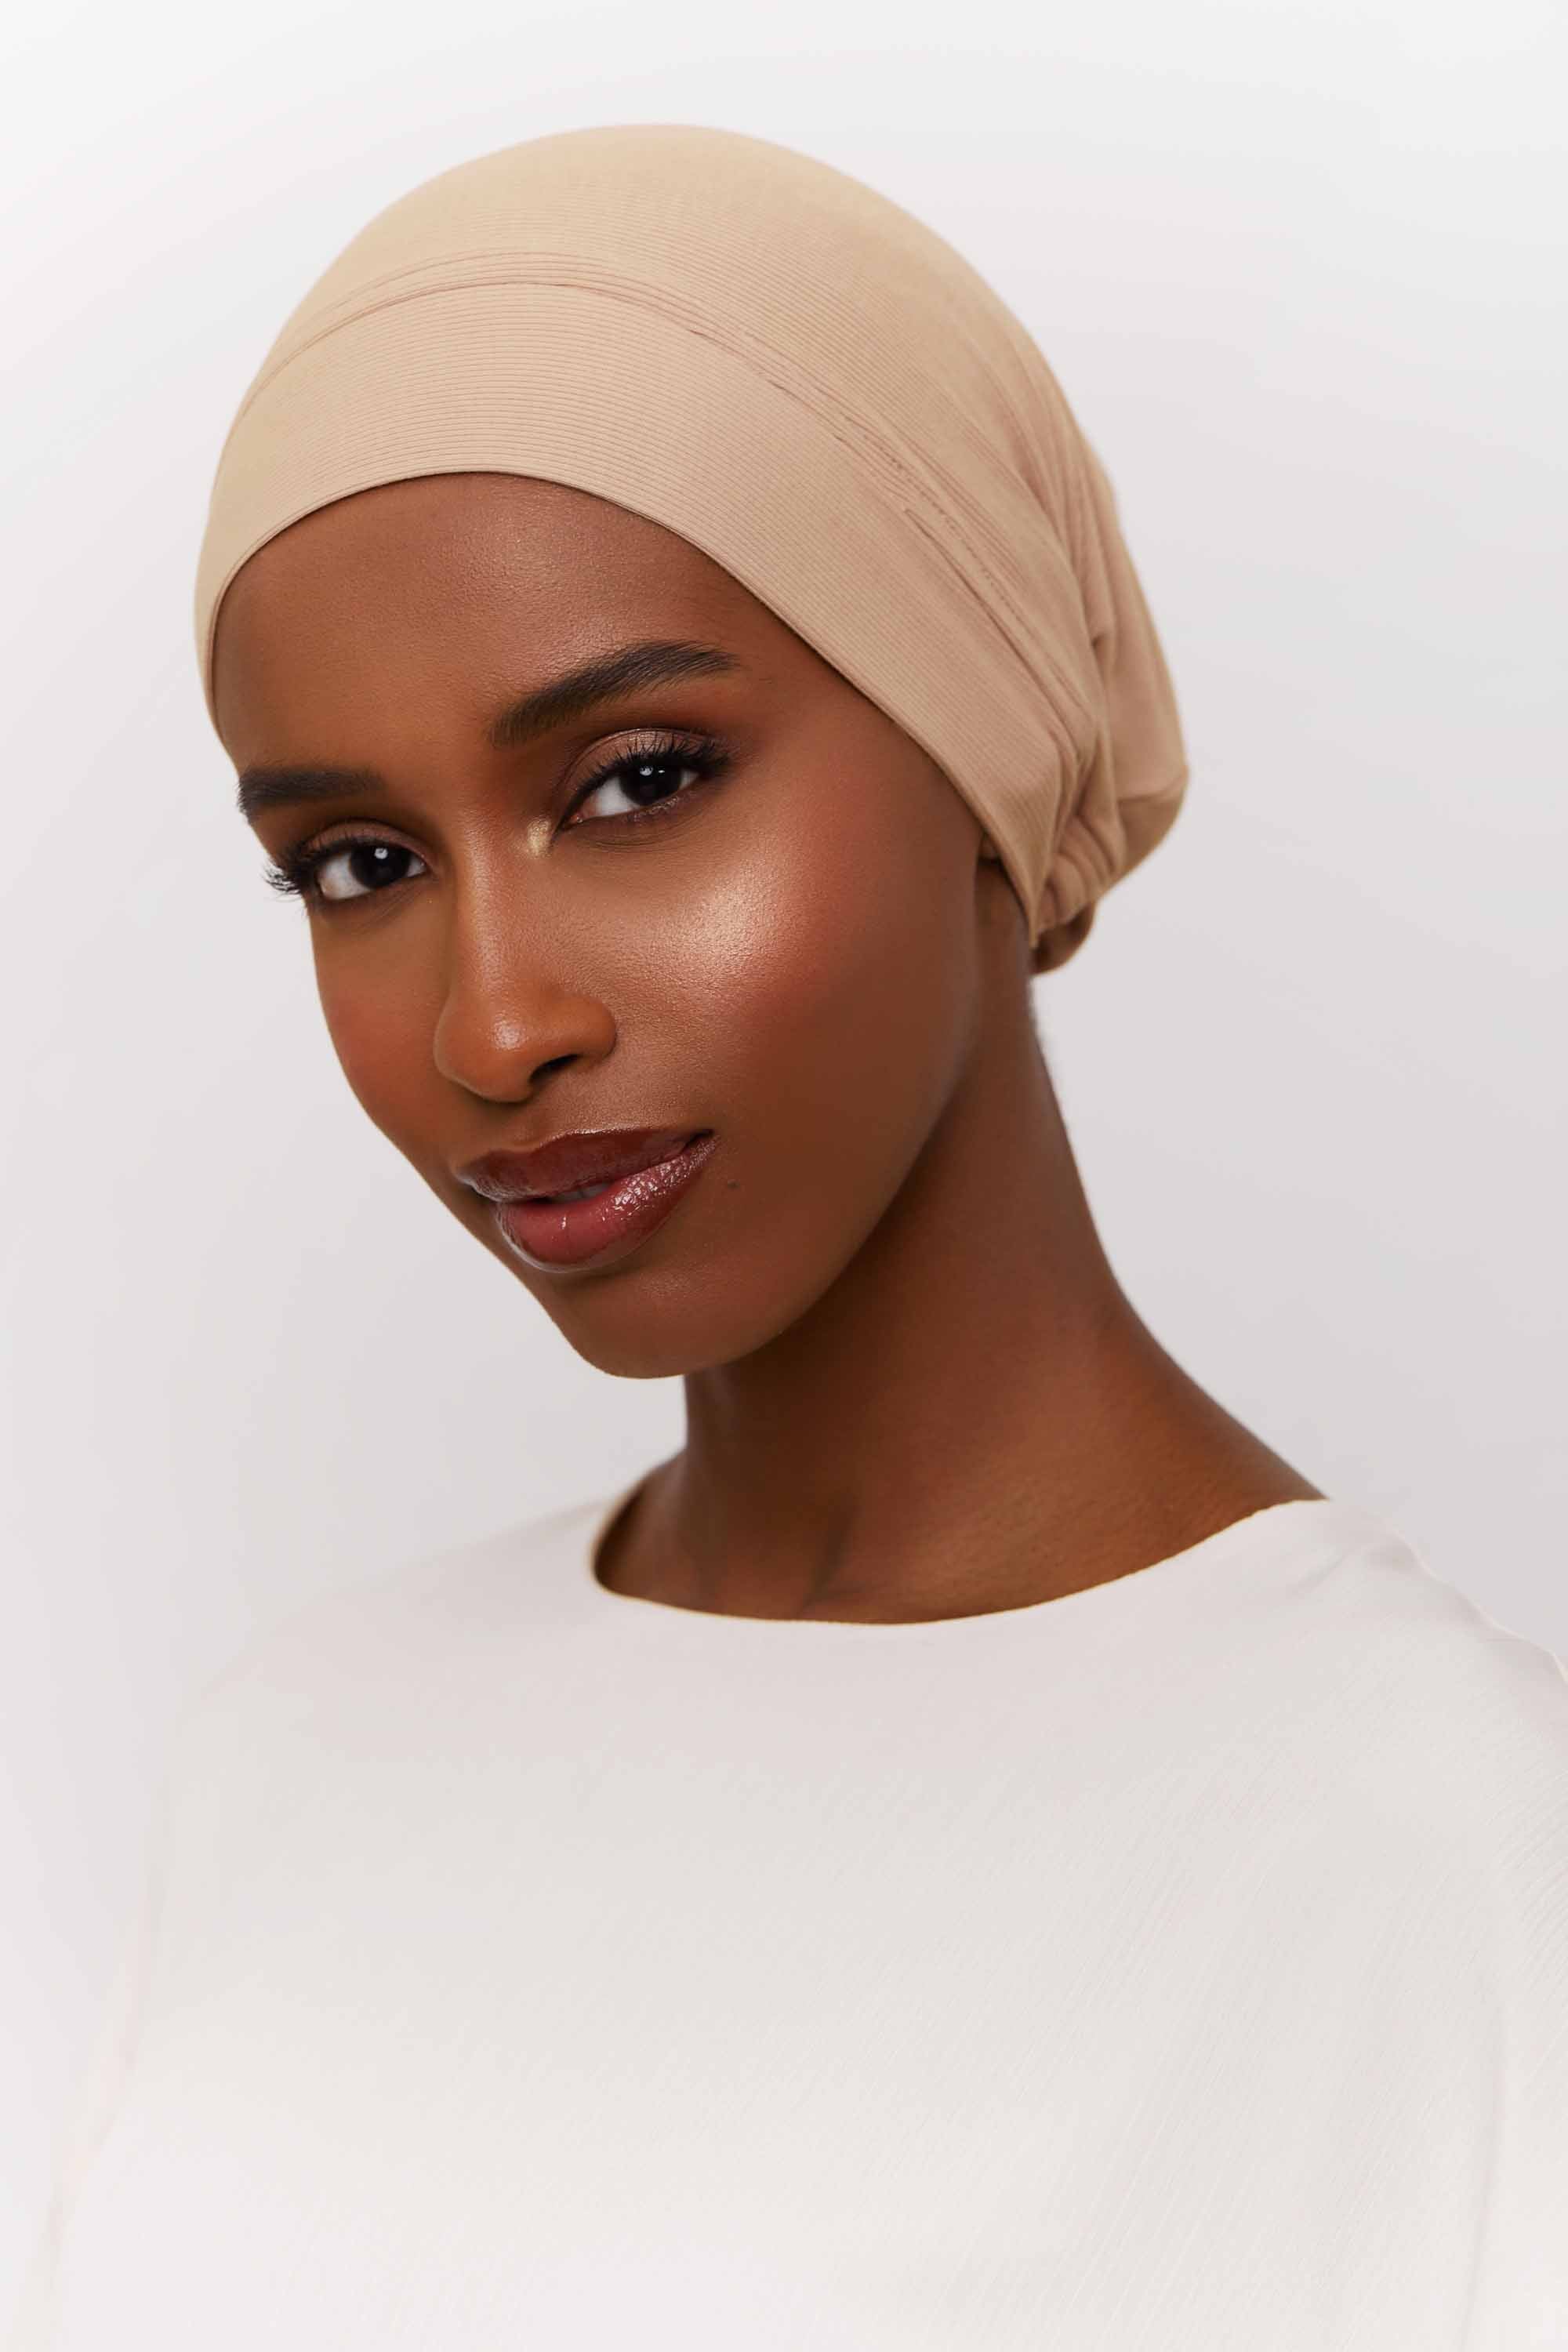 Ribbed Tie Back Undercap - Light Natural Extra Small Accessories Veiled 